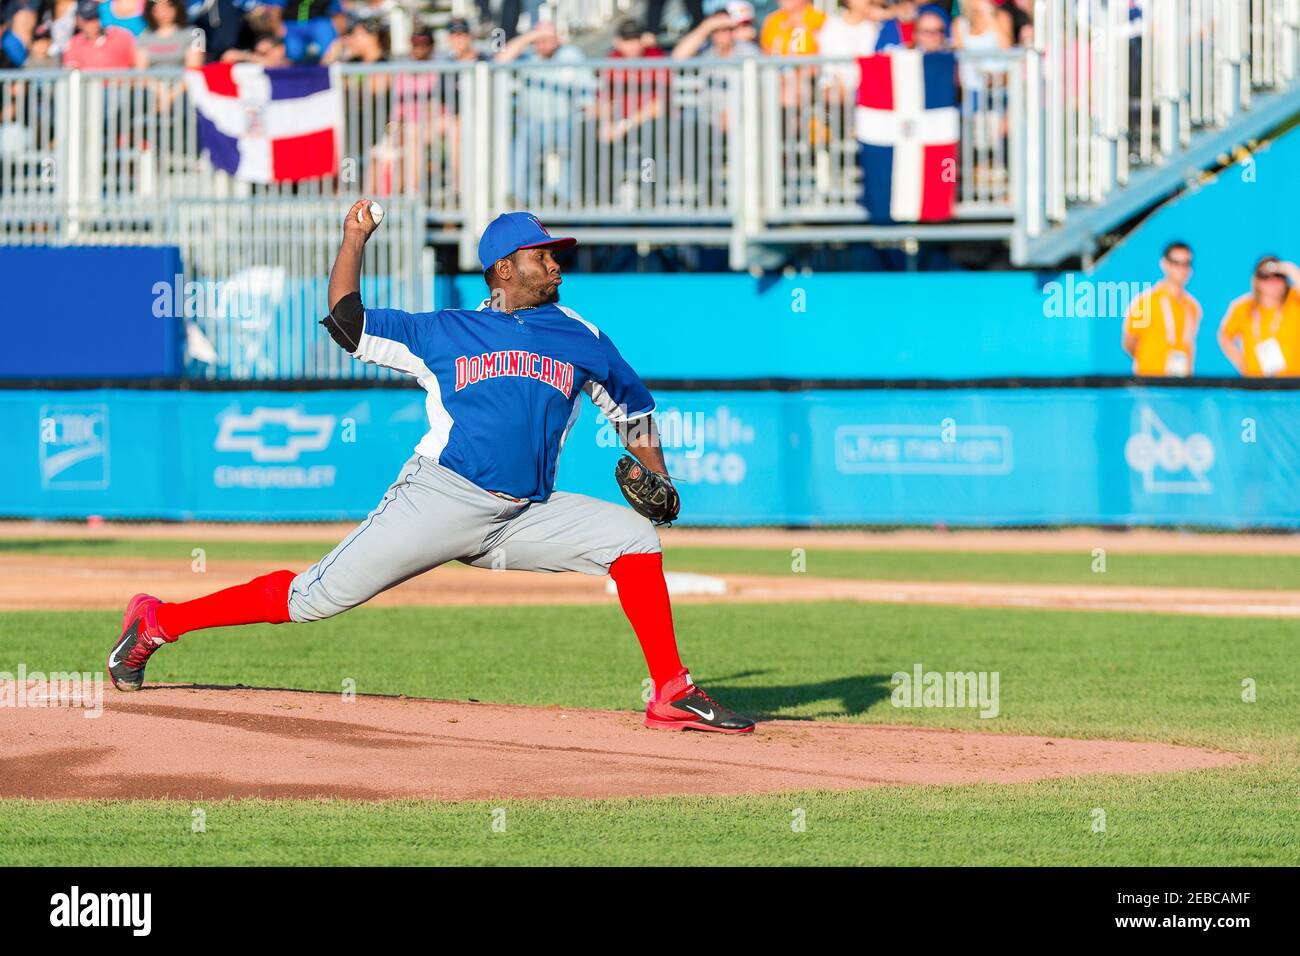 Toronto Panam Baseball 2015-Cuba vs the Dominican Republic:  Adalberto Mendez (Dominican Republic) opens the match against Cuba and gets a lost game by all Stock Photo